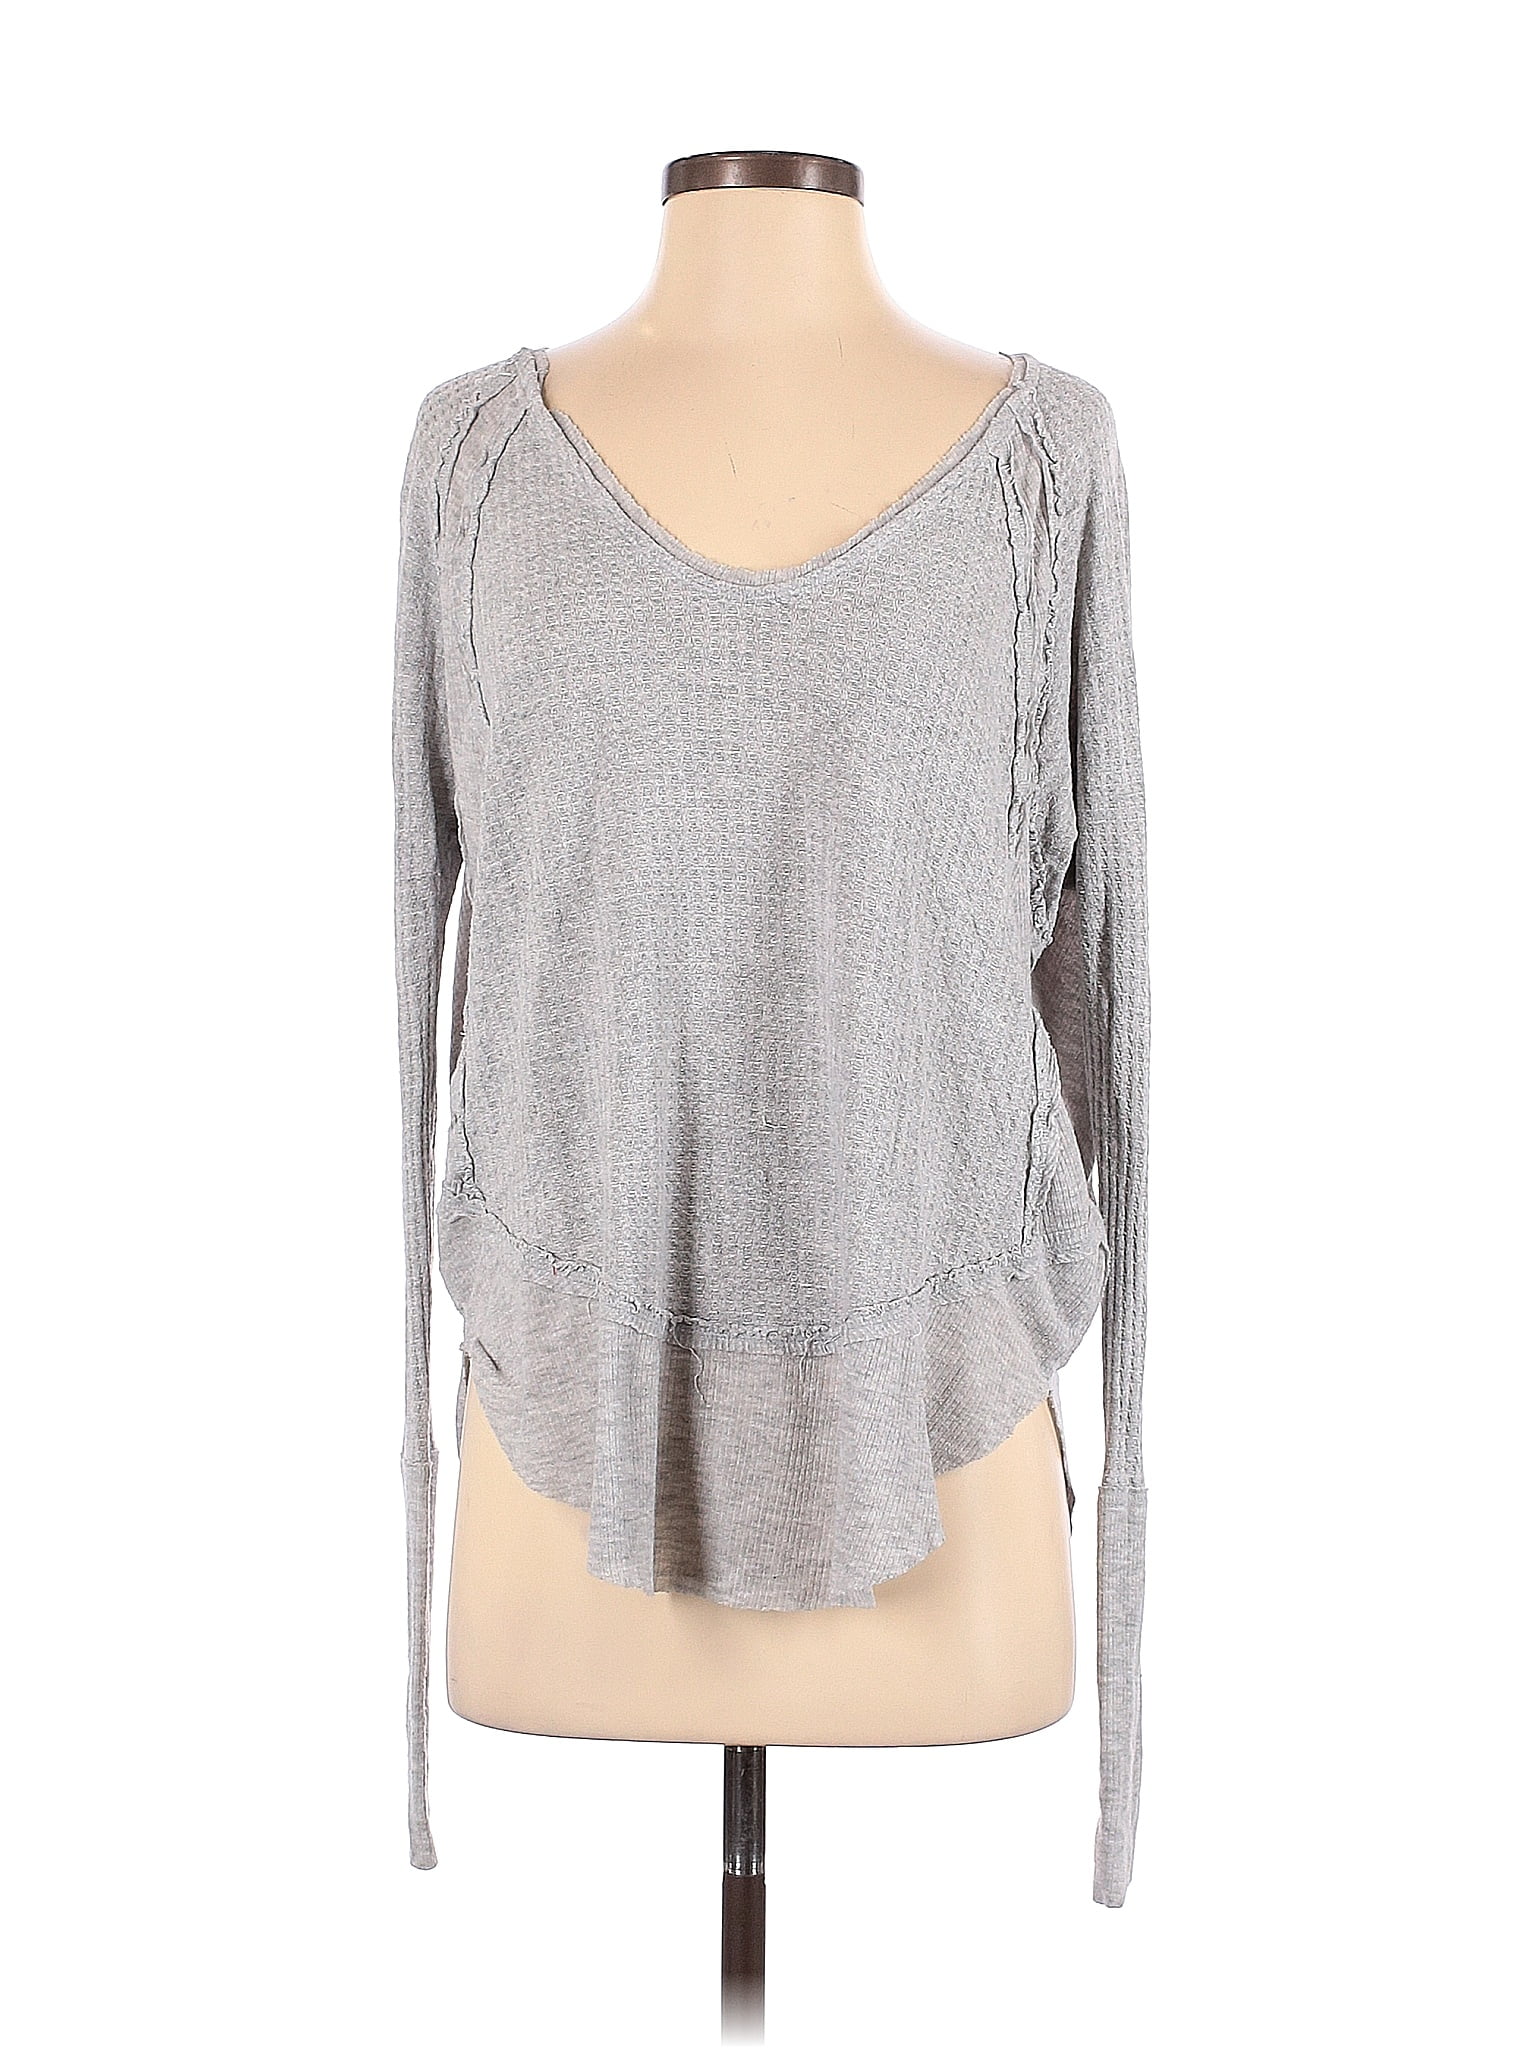 We the Free Marled Gray Thermal Top Size S - 65% off | thredUP